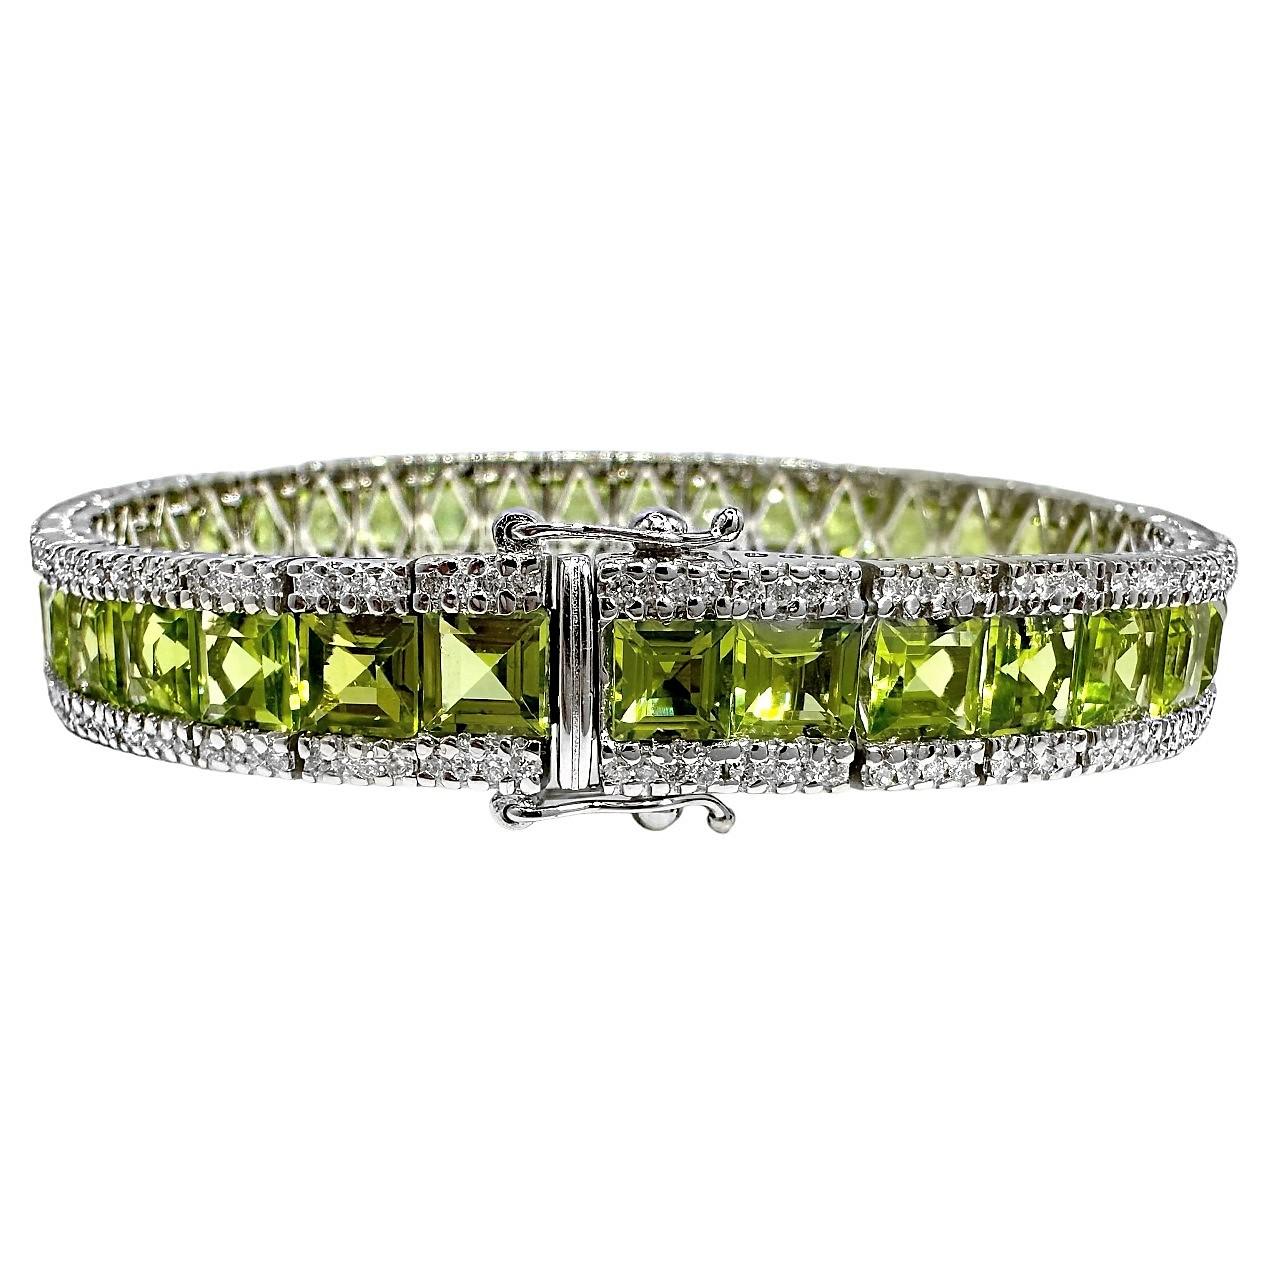 Women's or Men's Line Bracelet of Square Cut Peridot in White Gold with Diamonds For Sale